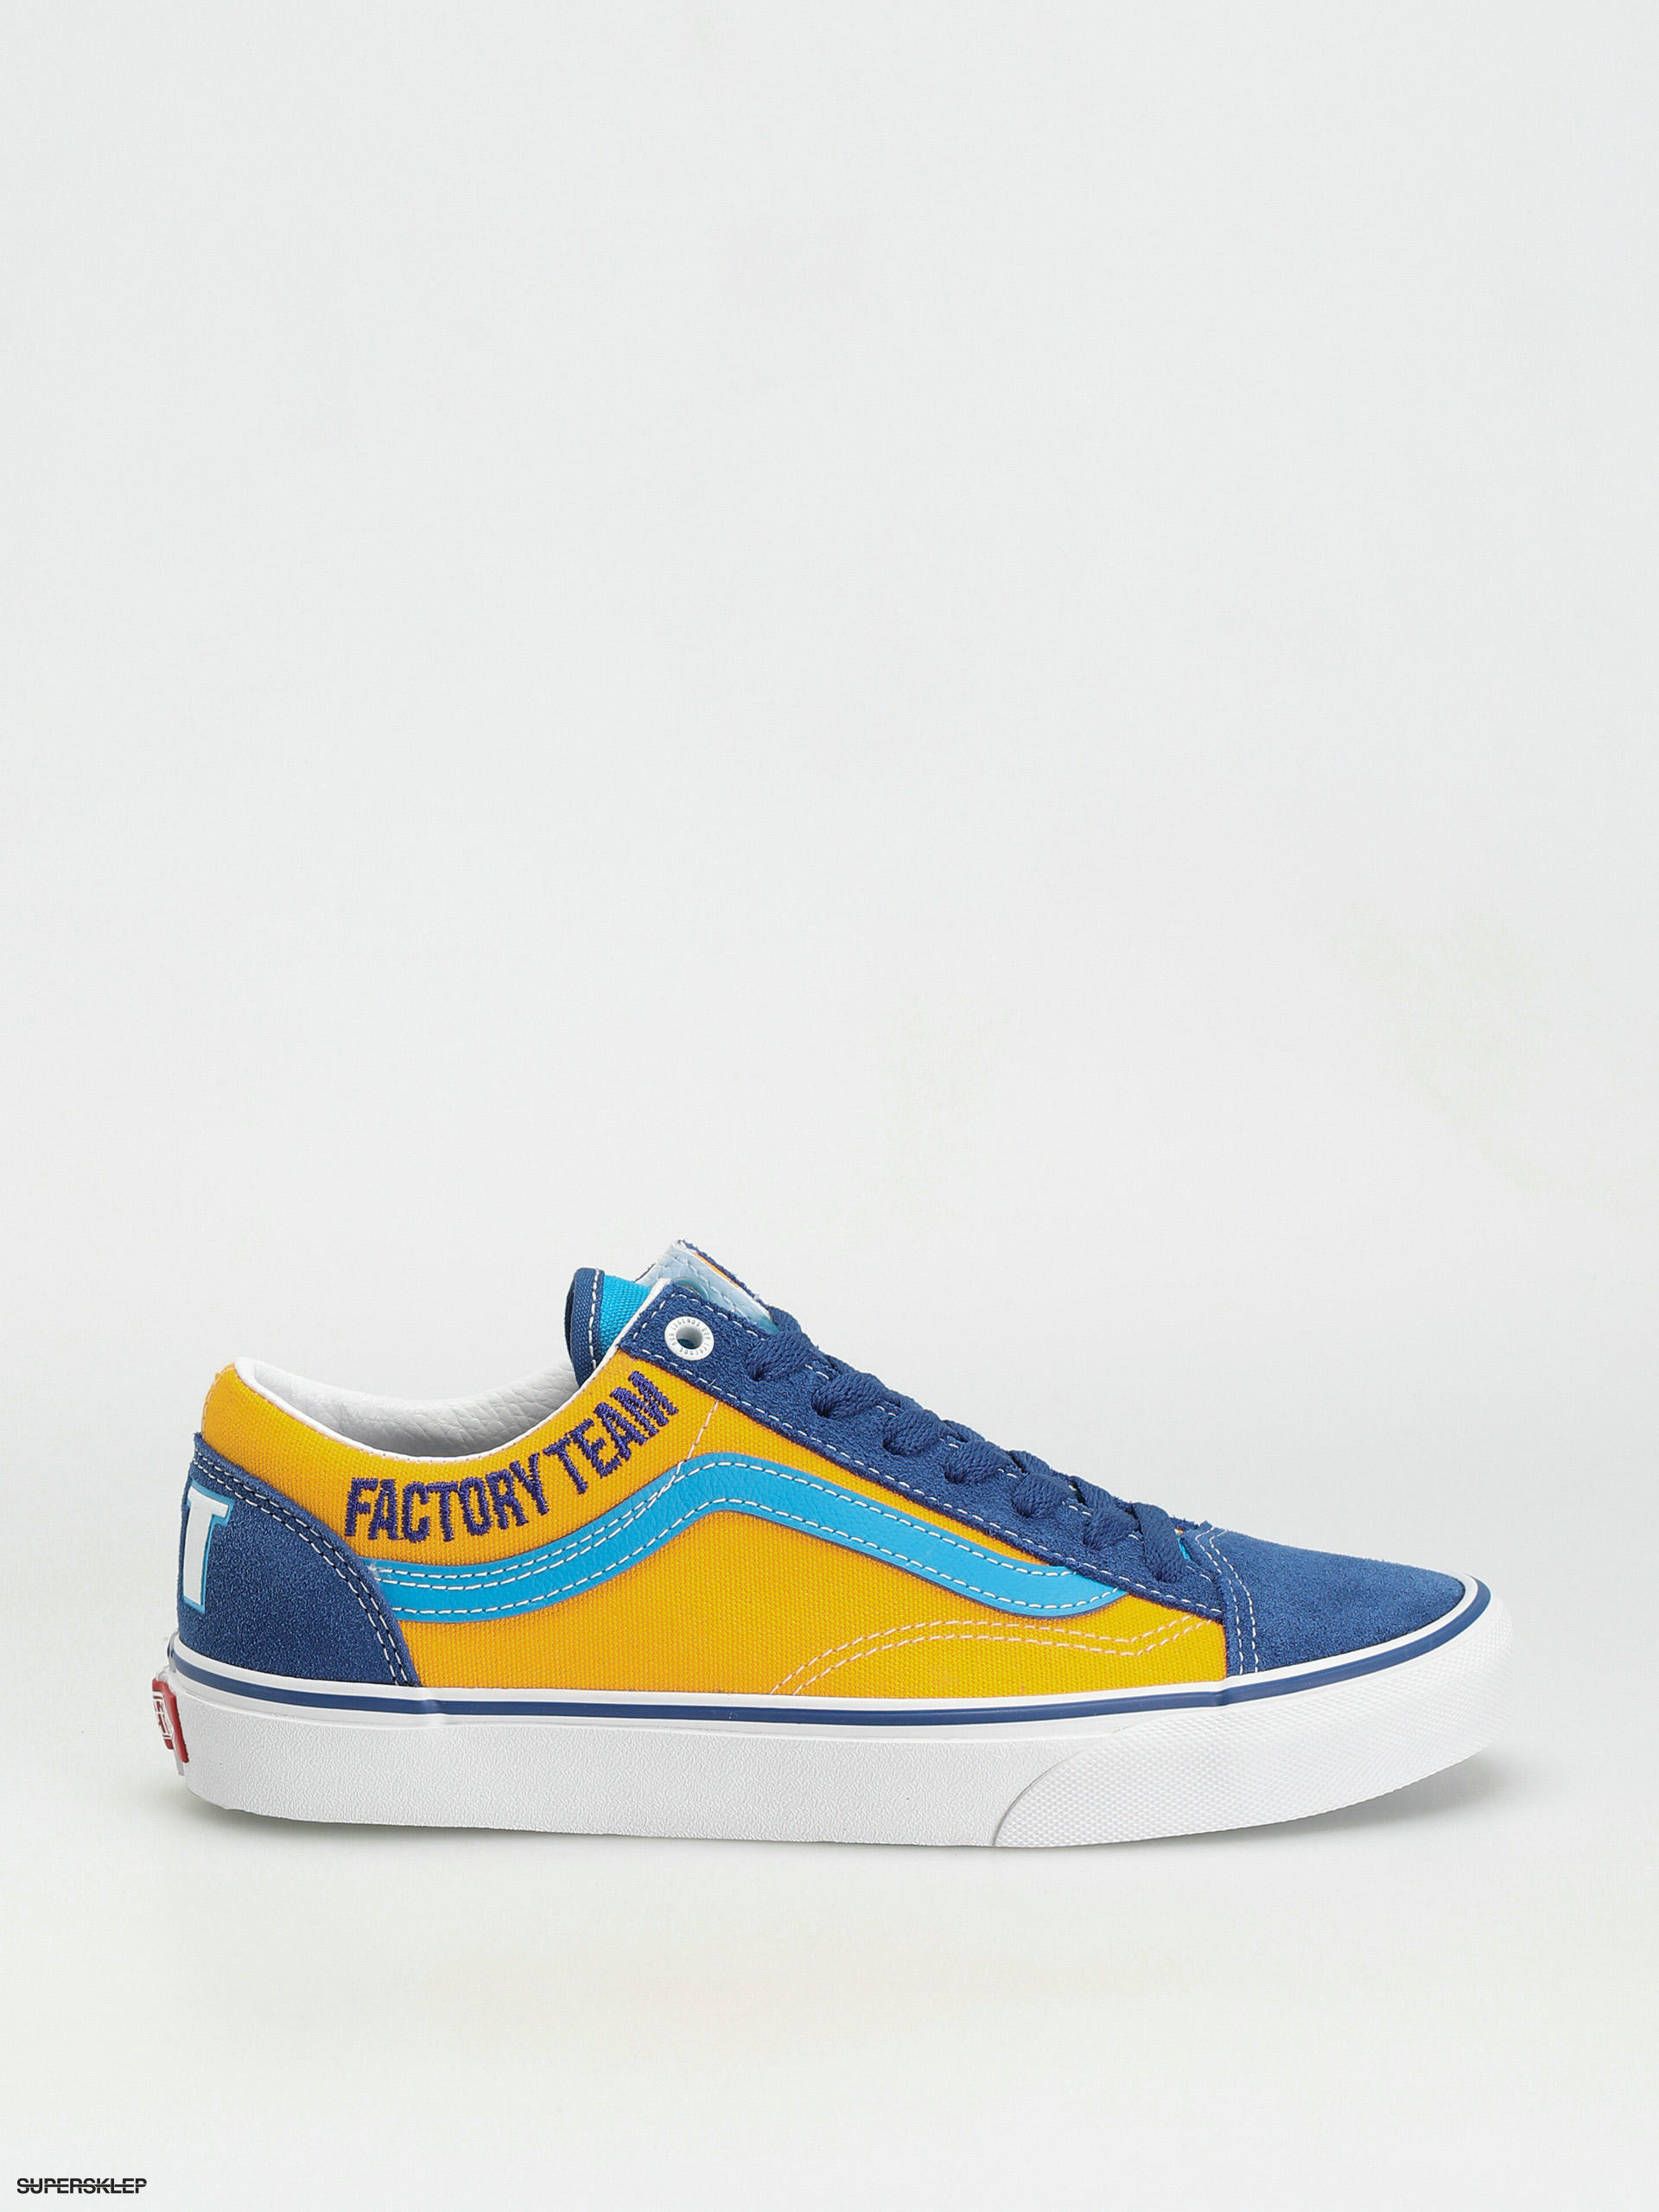 Boty Vans Style 36 (our legends gt/dyno blue/yellow)